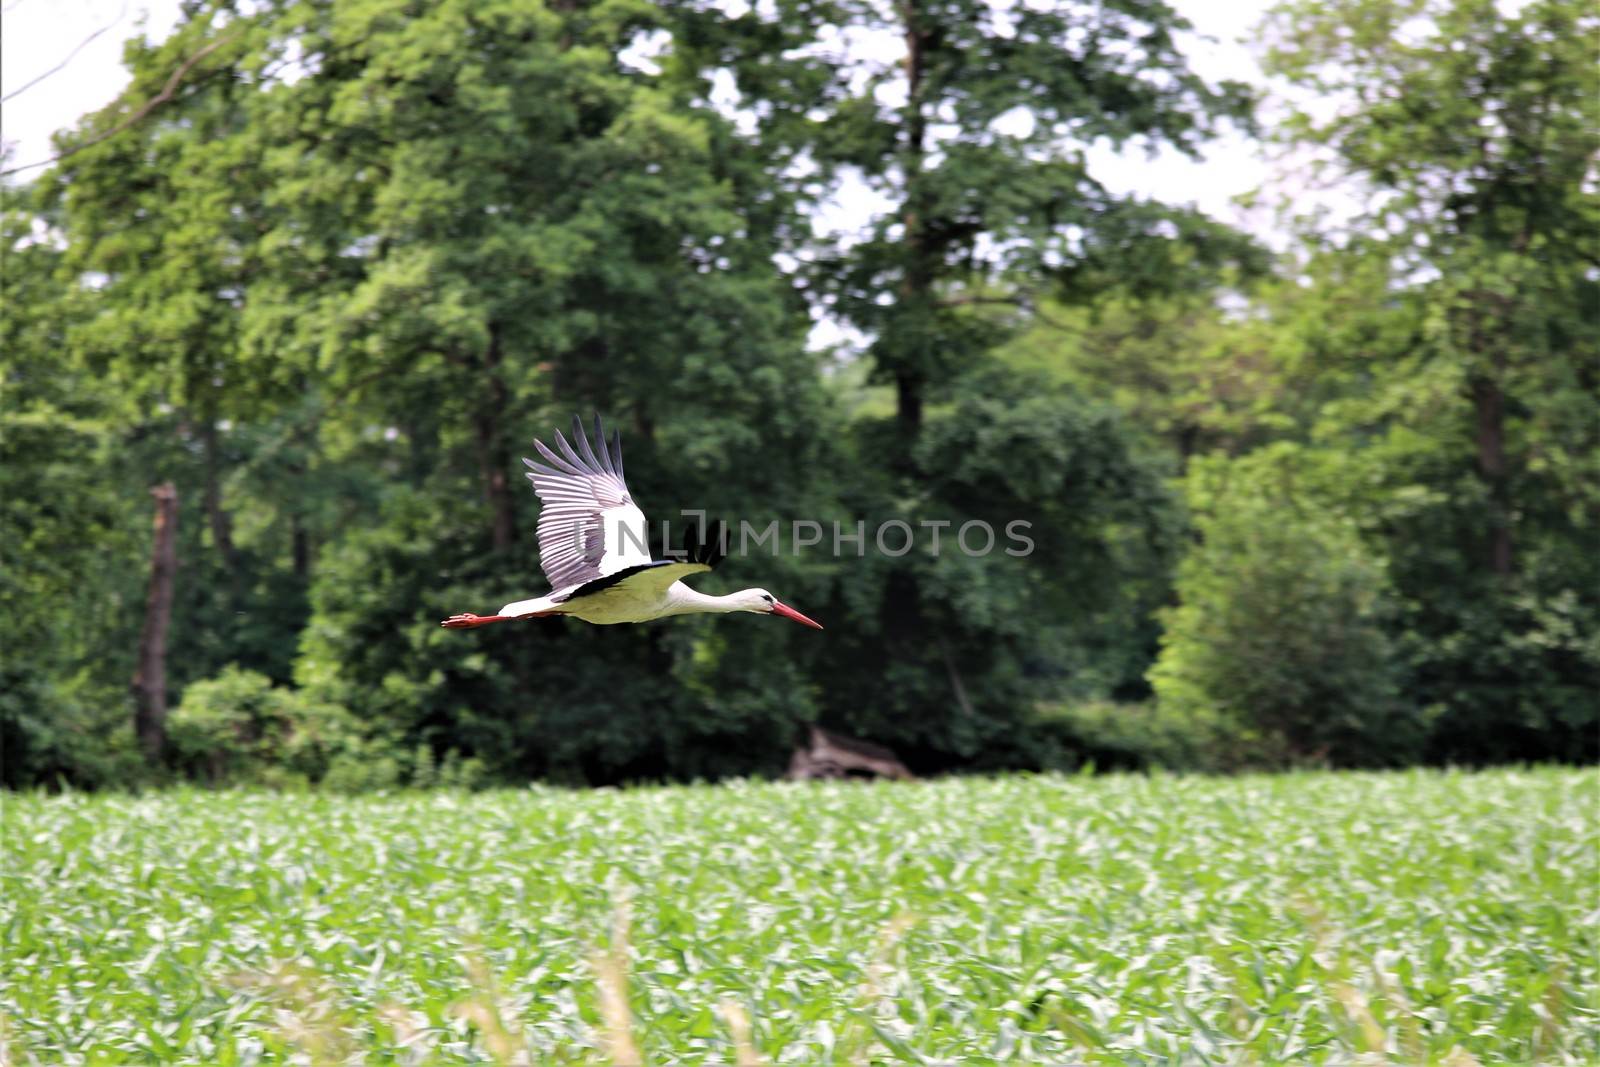 White storck flies over a corn field by Luise123